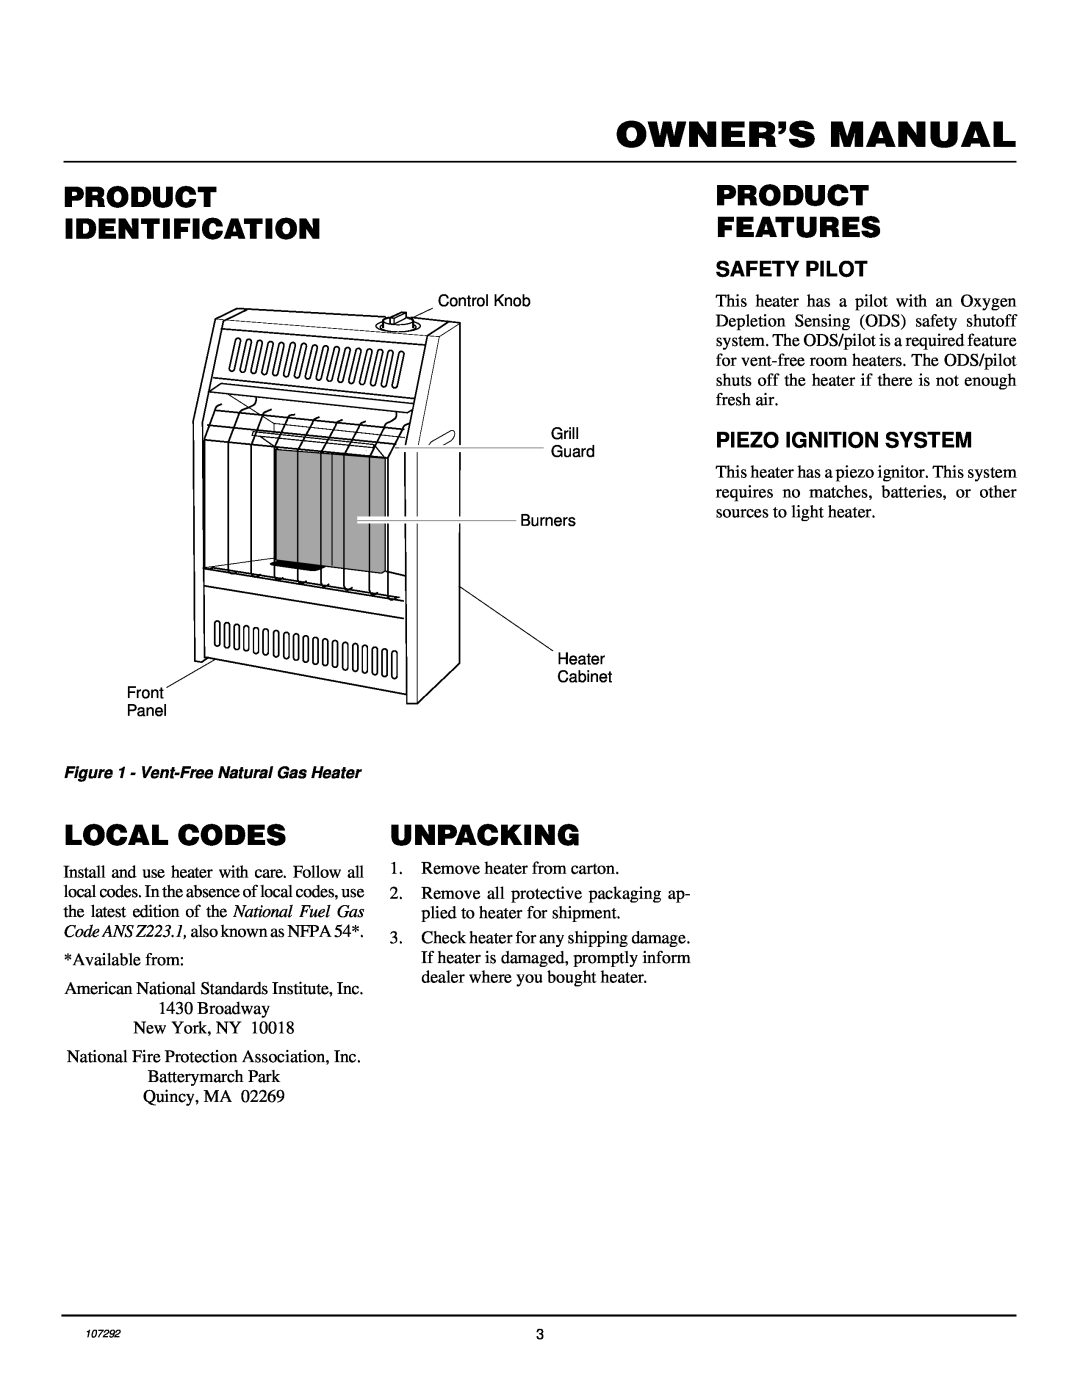 Desa CGR2N installation manual Product Identification, Product Features, Local Codes, Unpacking 